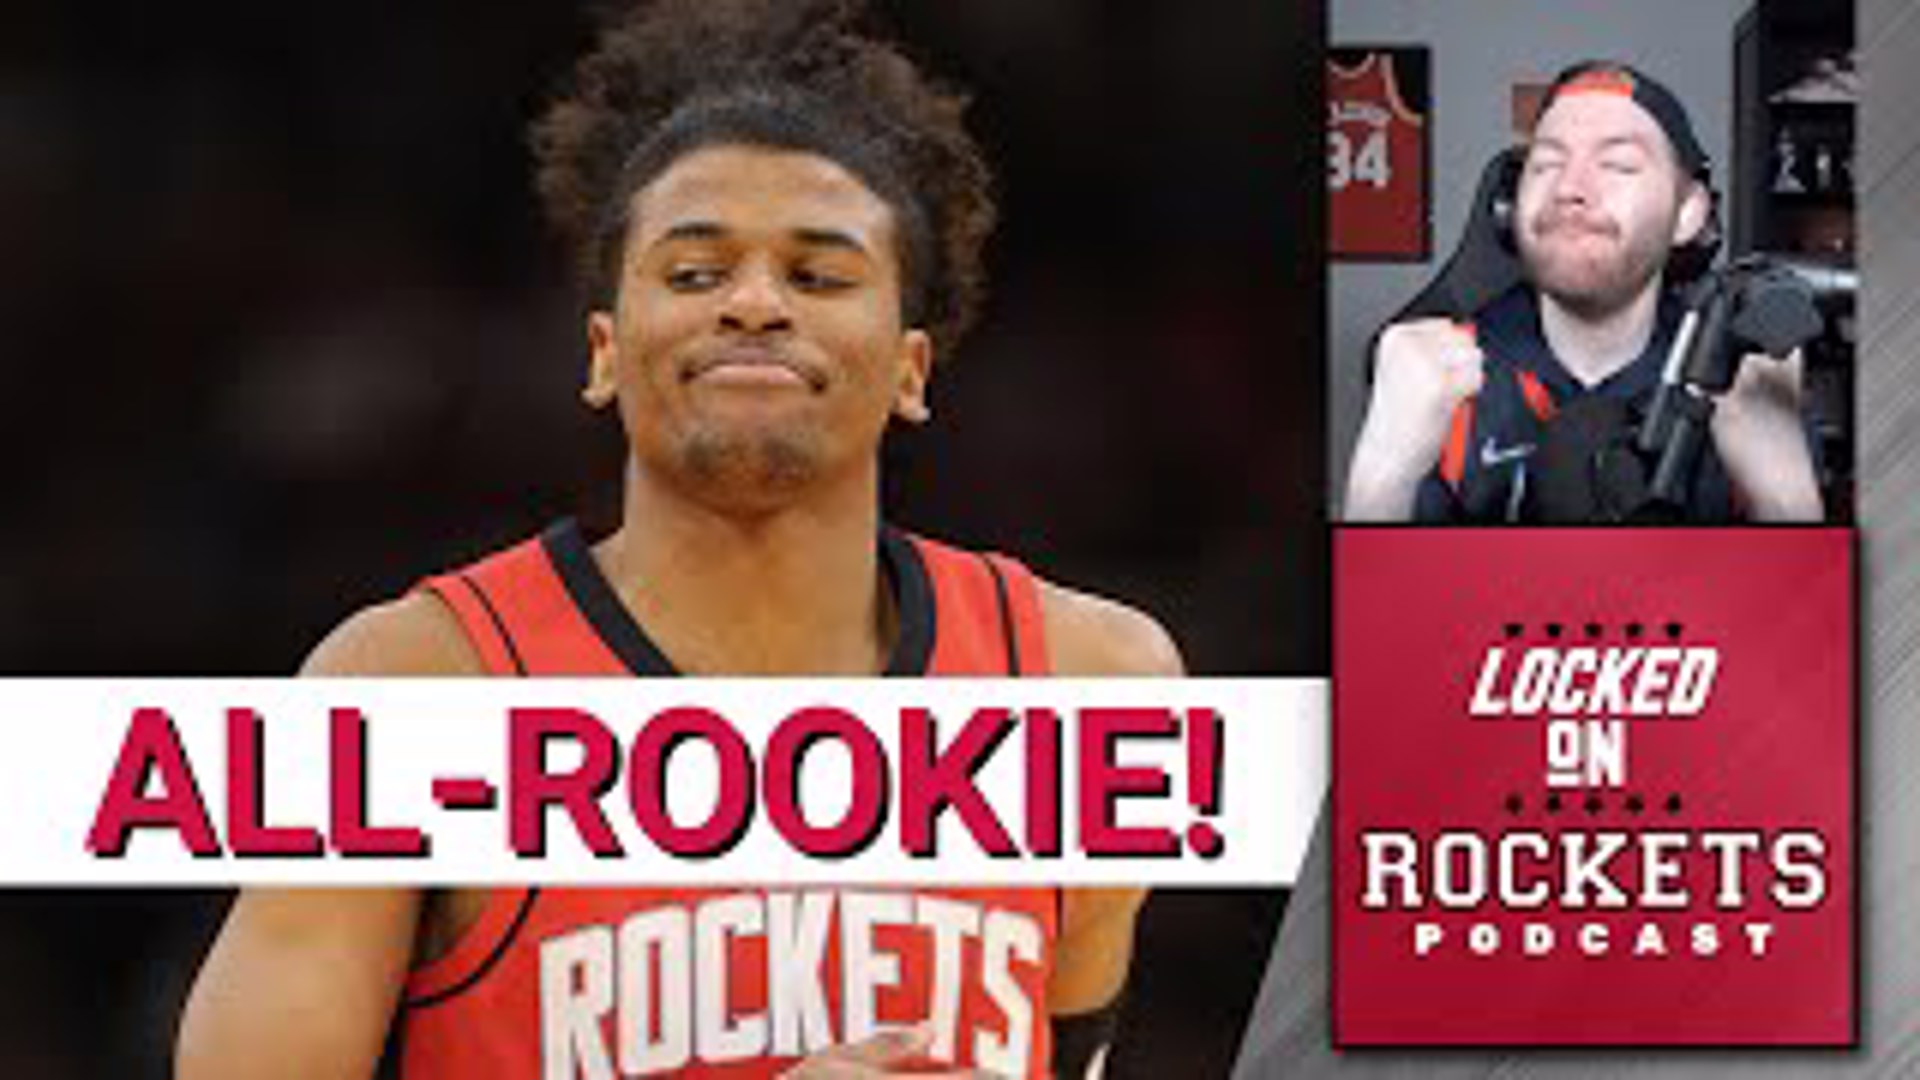 LockedOn Rockets host Jackson Gatlin reacts to Jalen Green being selected to the All-Rookie 1st team